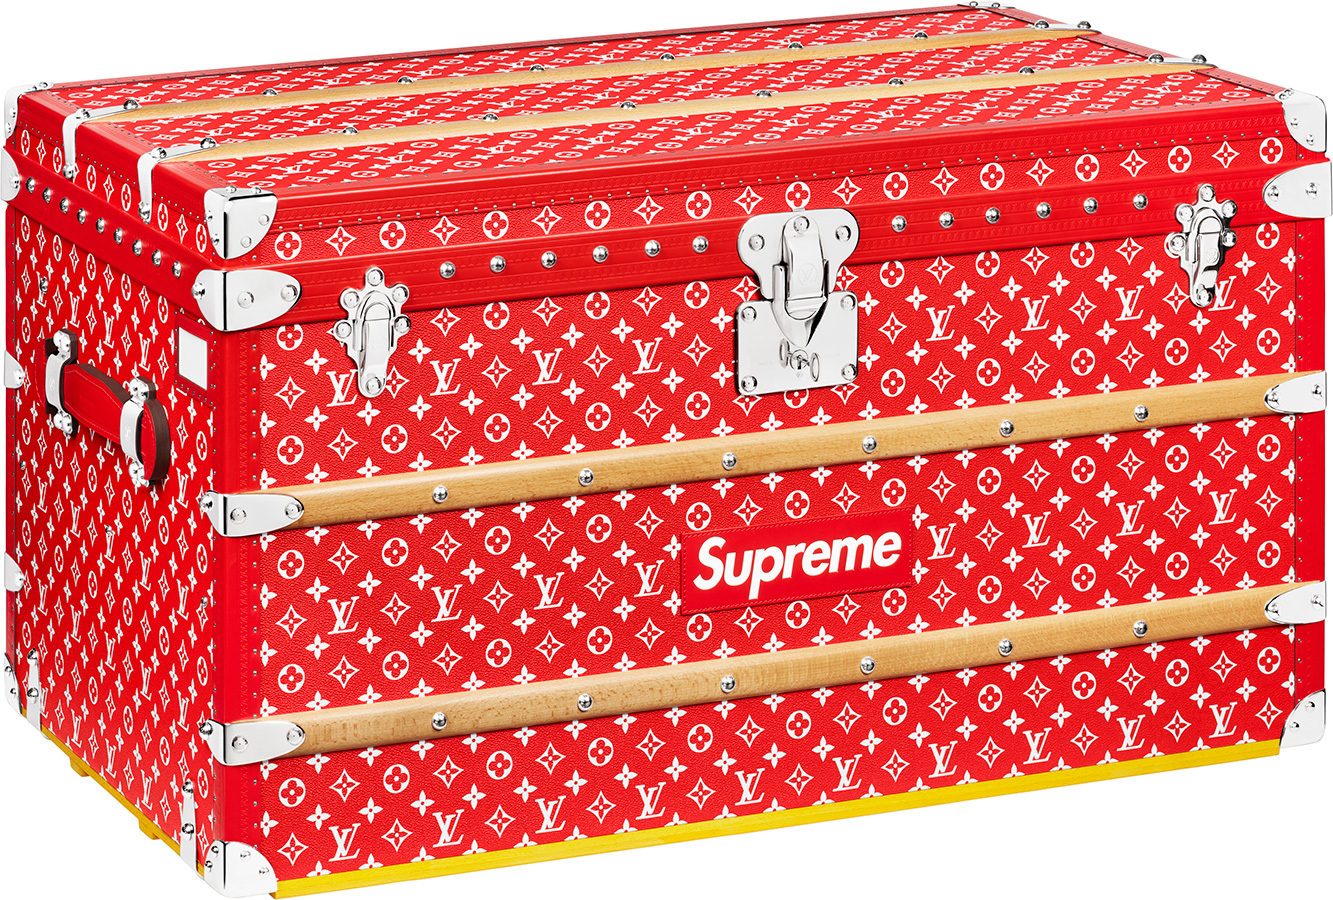 Christies to Offer 105 Supreme Lots Including Nearly All of the Brands  Skateboard Designs  Barrons